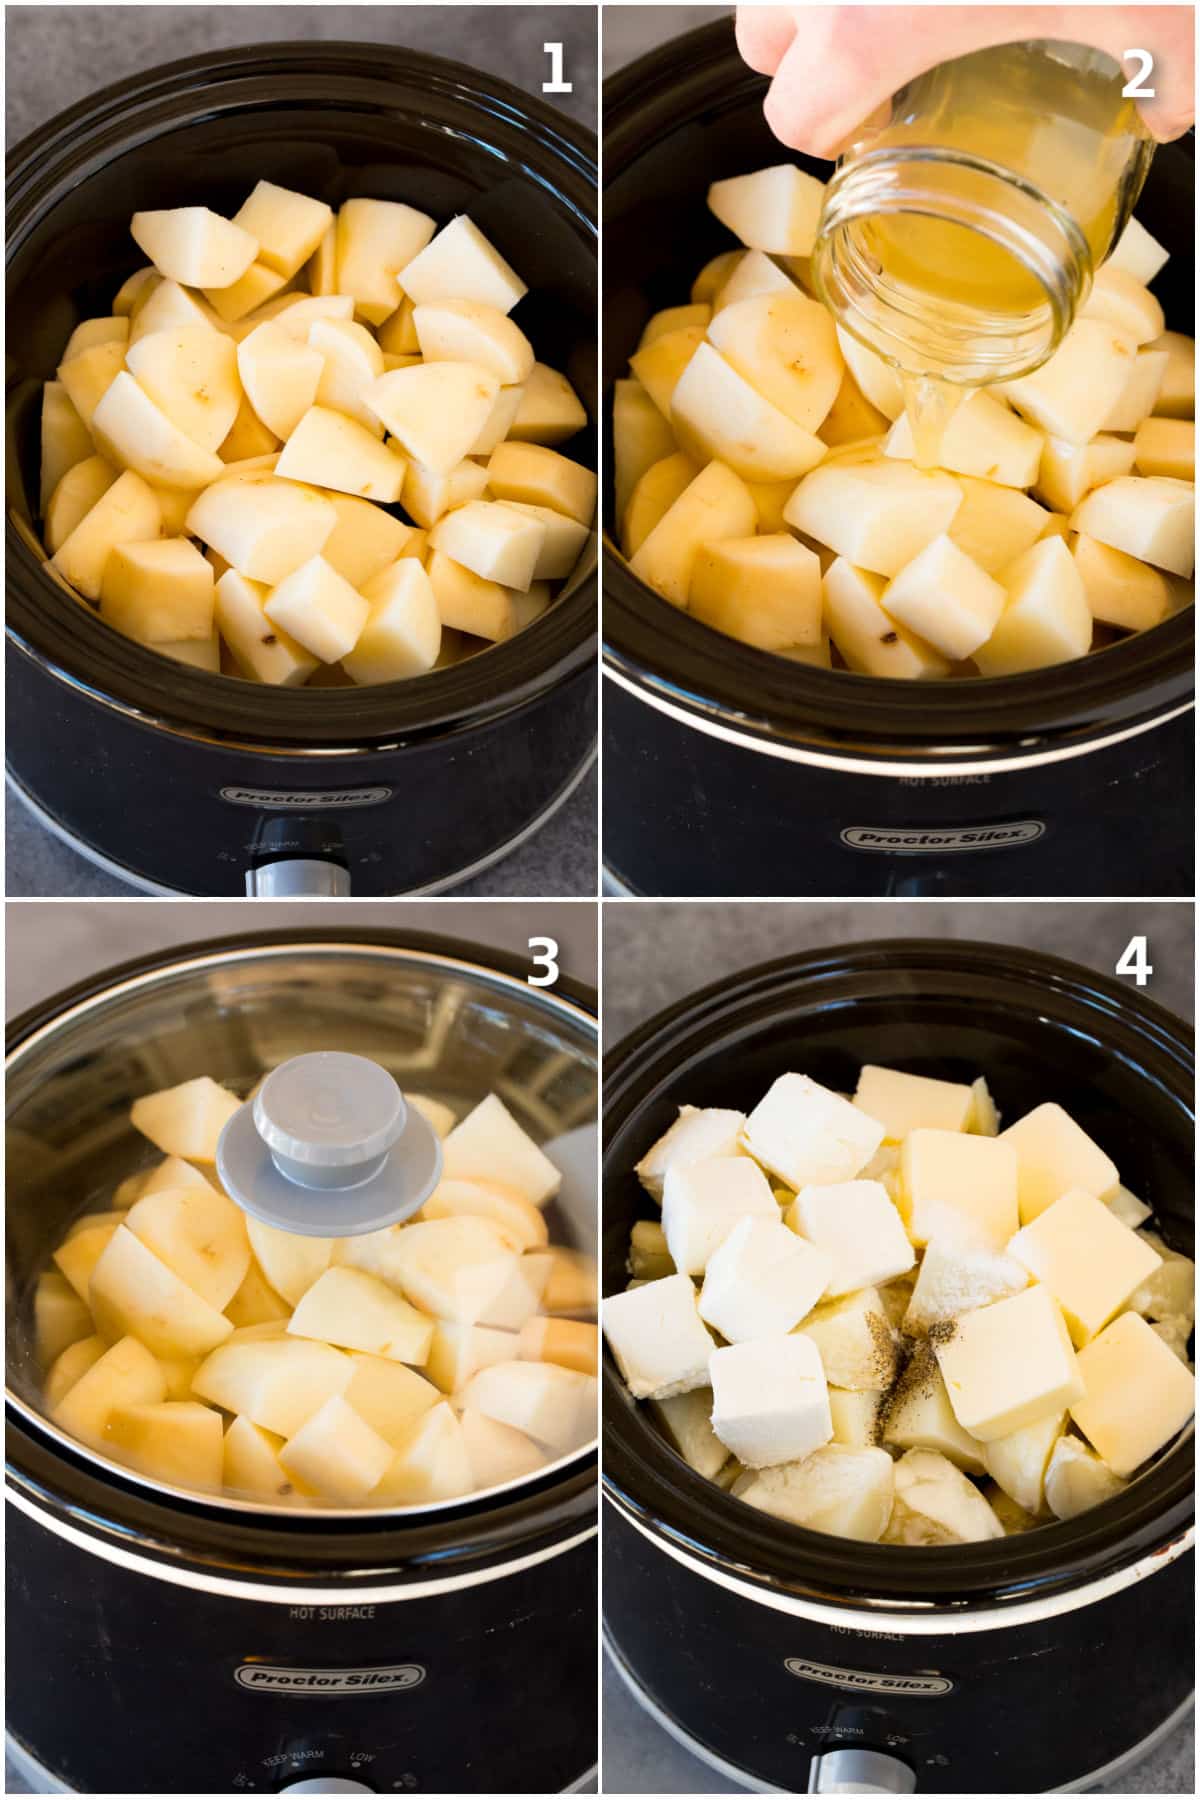 Step by step process shots showing how to make crock pot mashed potatoes.